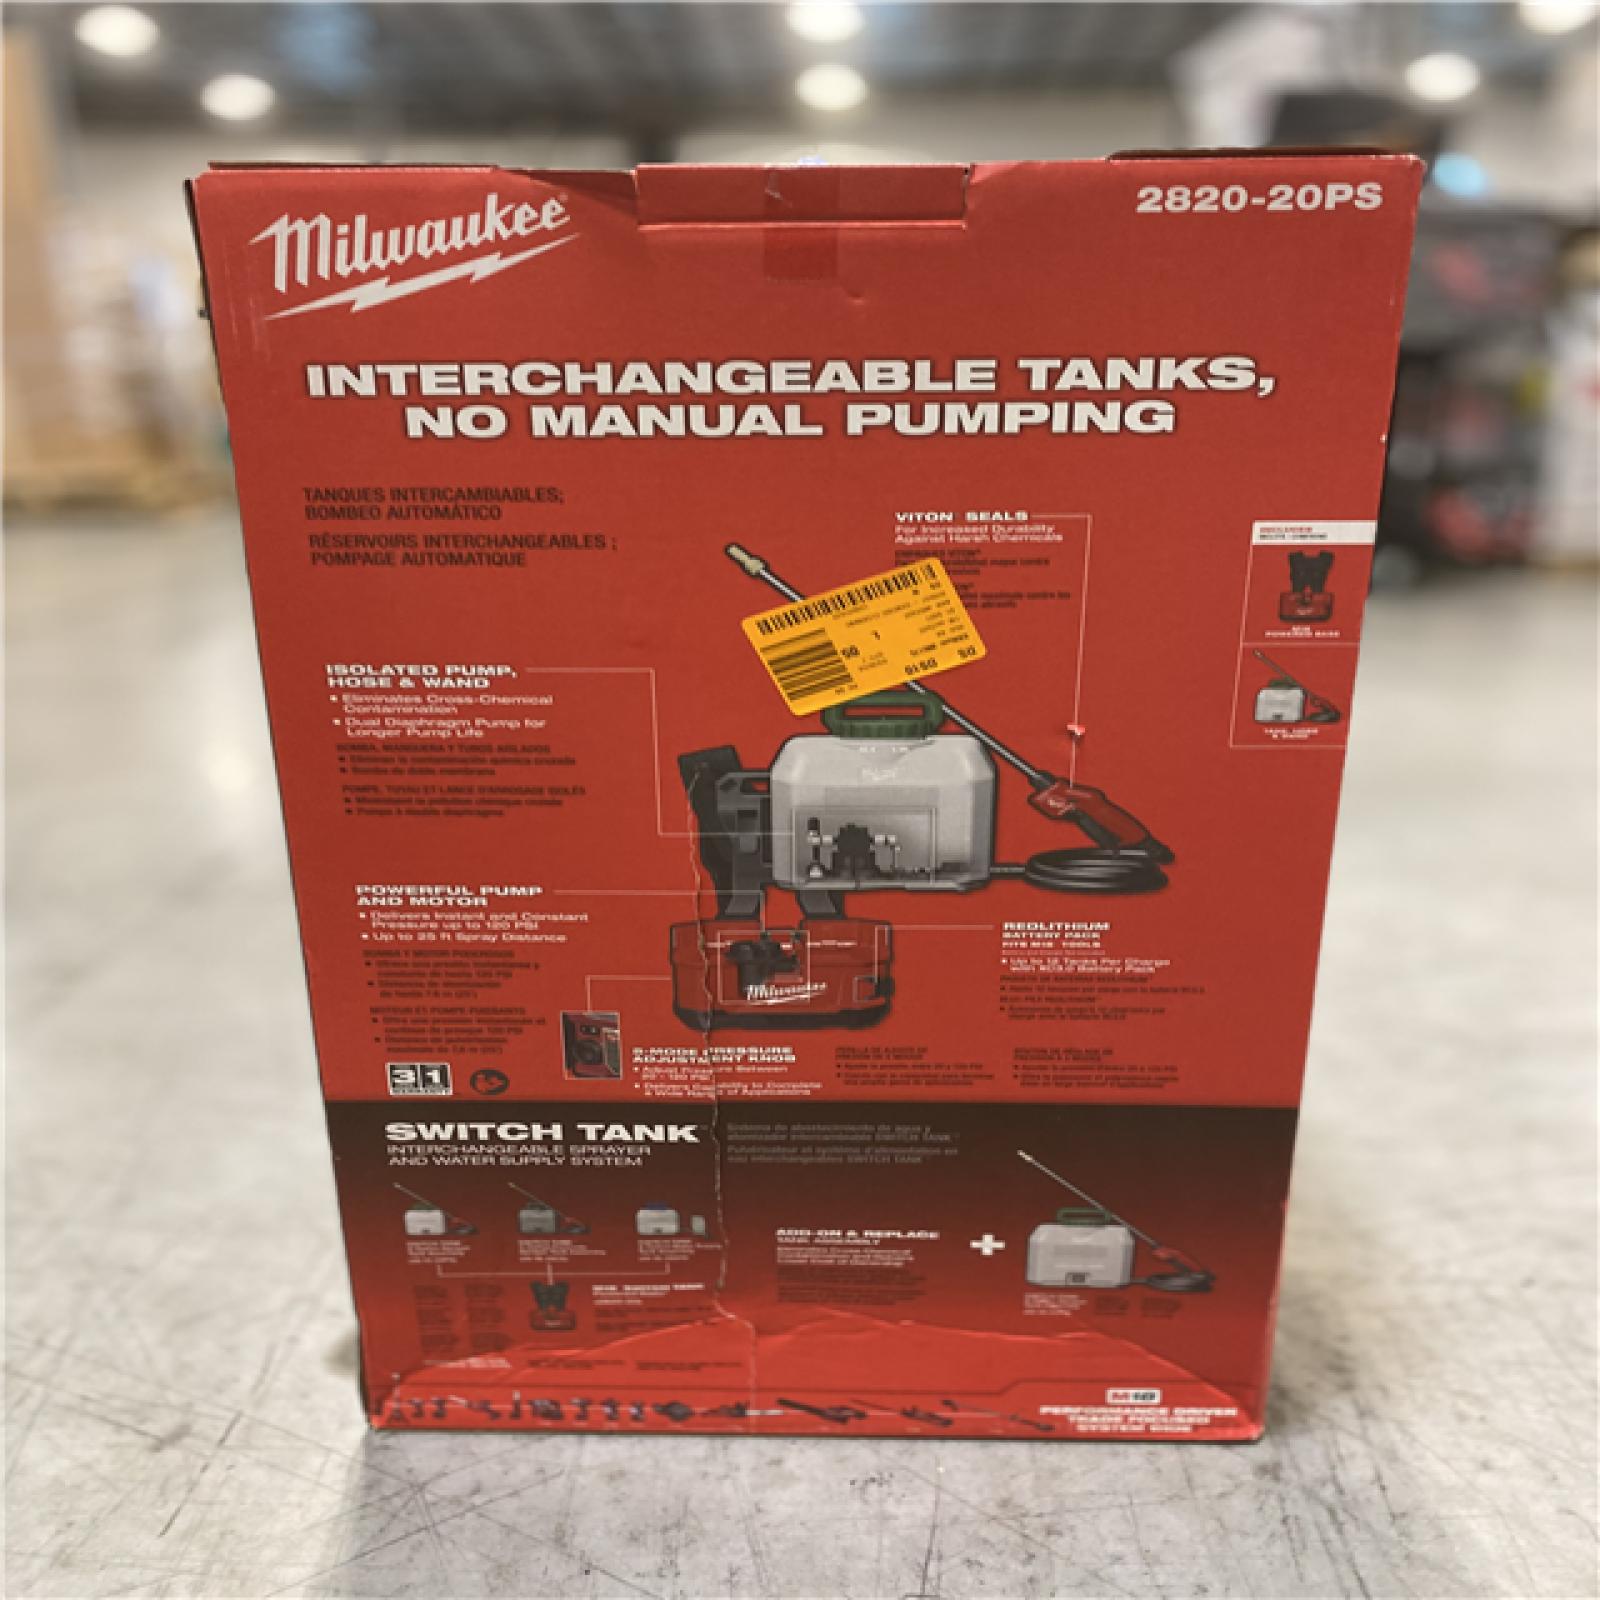 DALLAS LOCATION - Milwaukee M18 18-Volt 4 Gal. Lithium-Ion Cordless Switch Tank Backpack Pesticide Sprayer